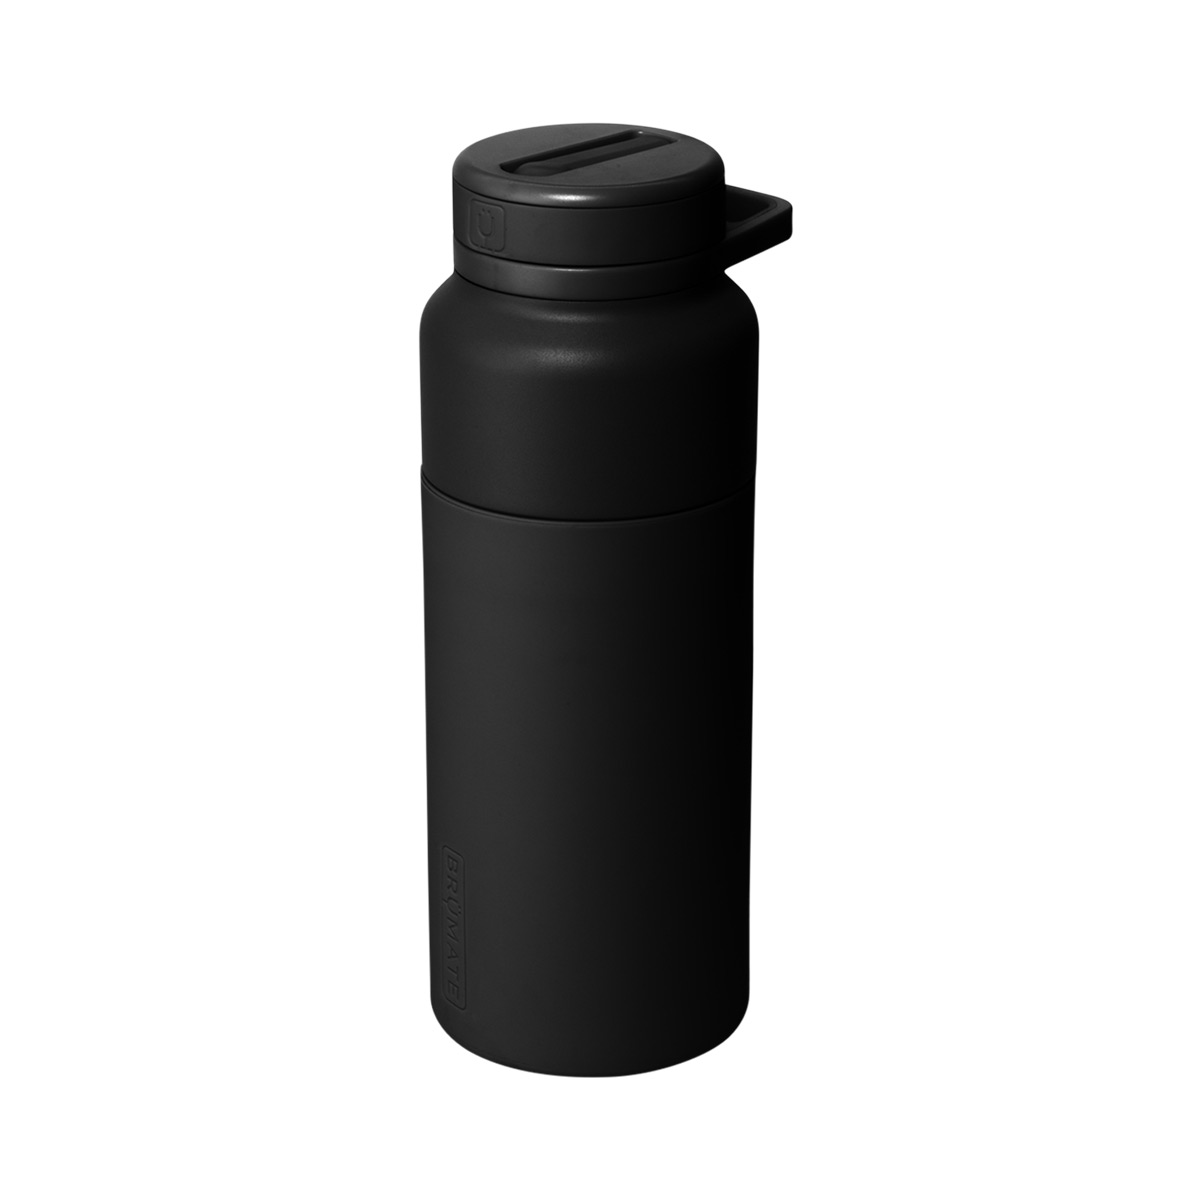 https://www.containerstore.com/catalogimages/487272/10094318-rotera-35-matte-black-ven.jpg